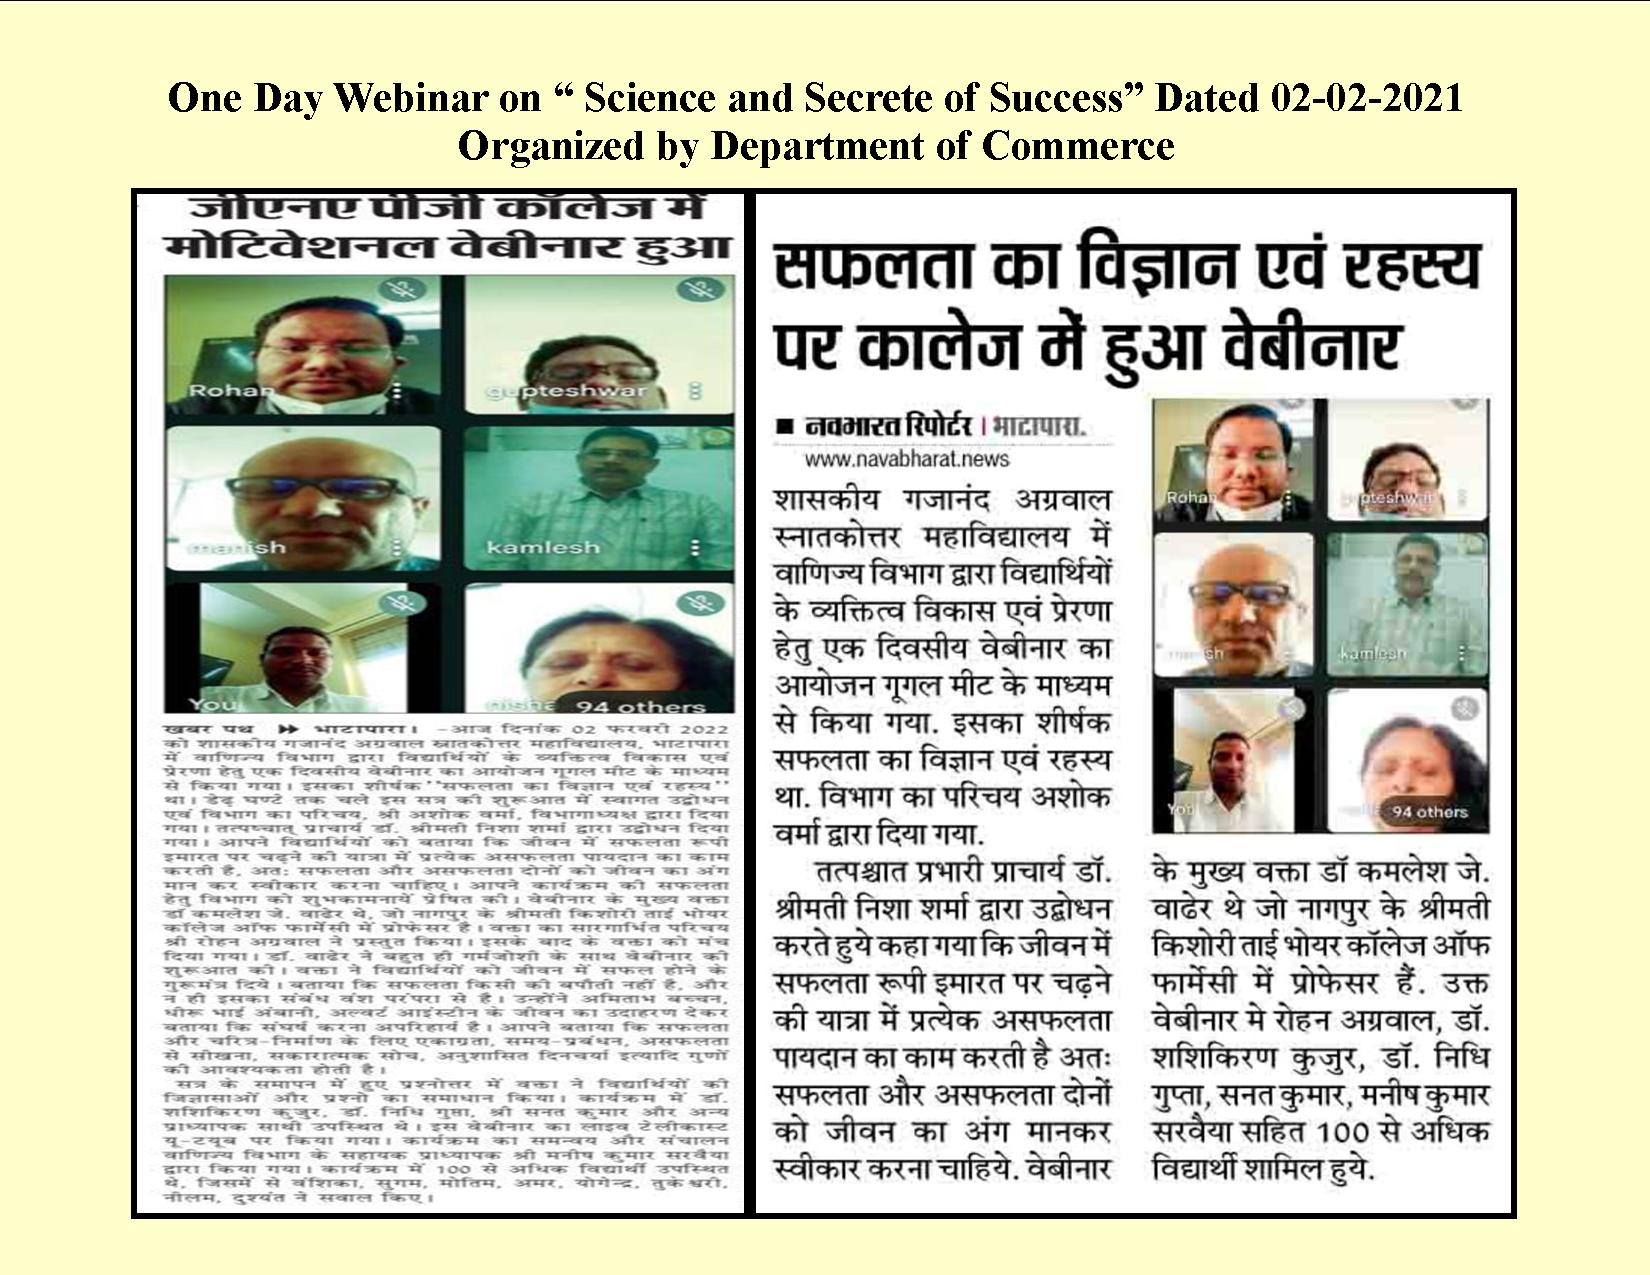 One Day Webinar on “ Science and Secrete of Success” Dated 02-02-2021 Organized by Department of Commerce